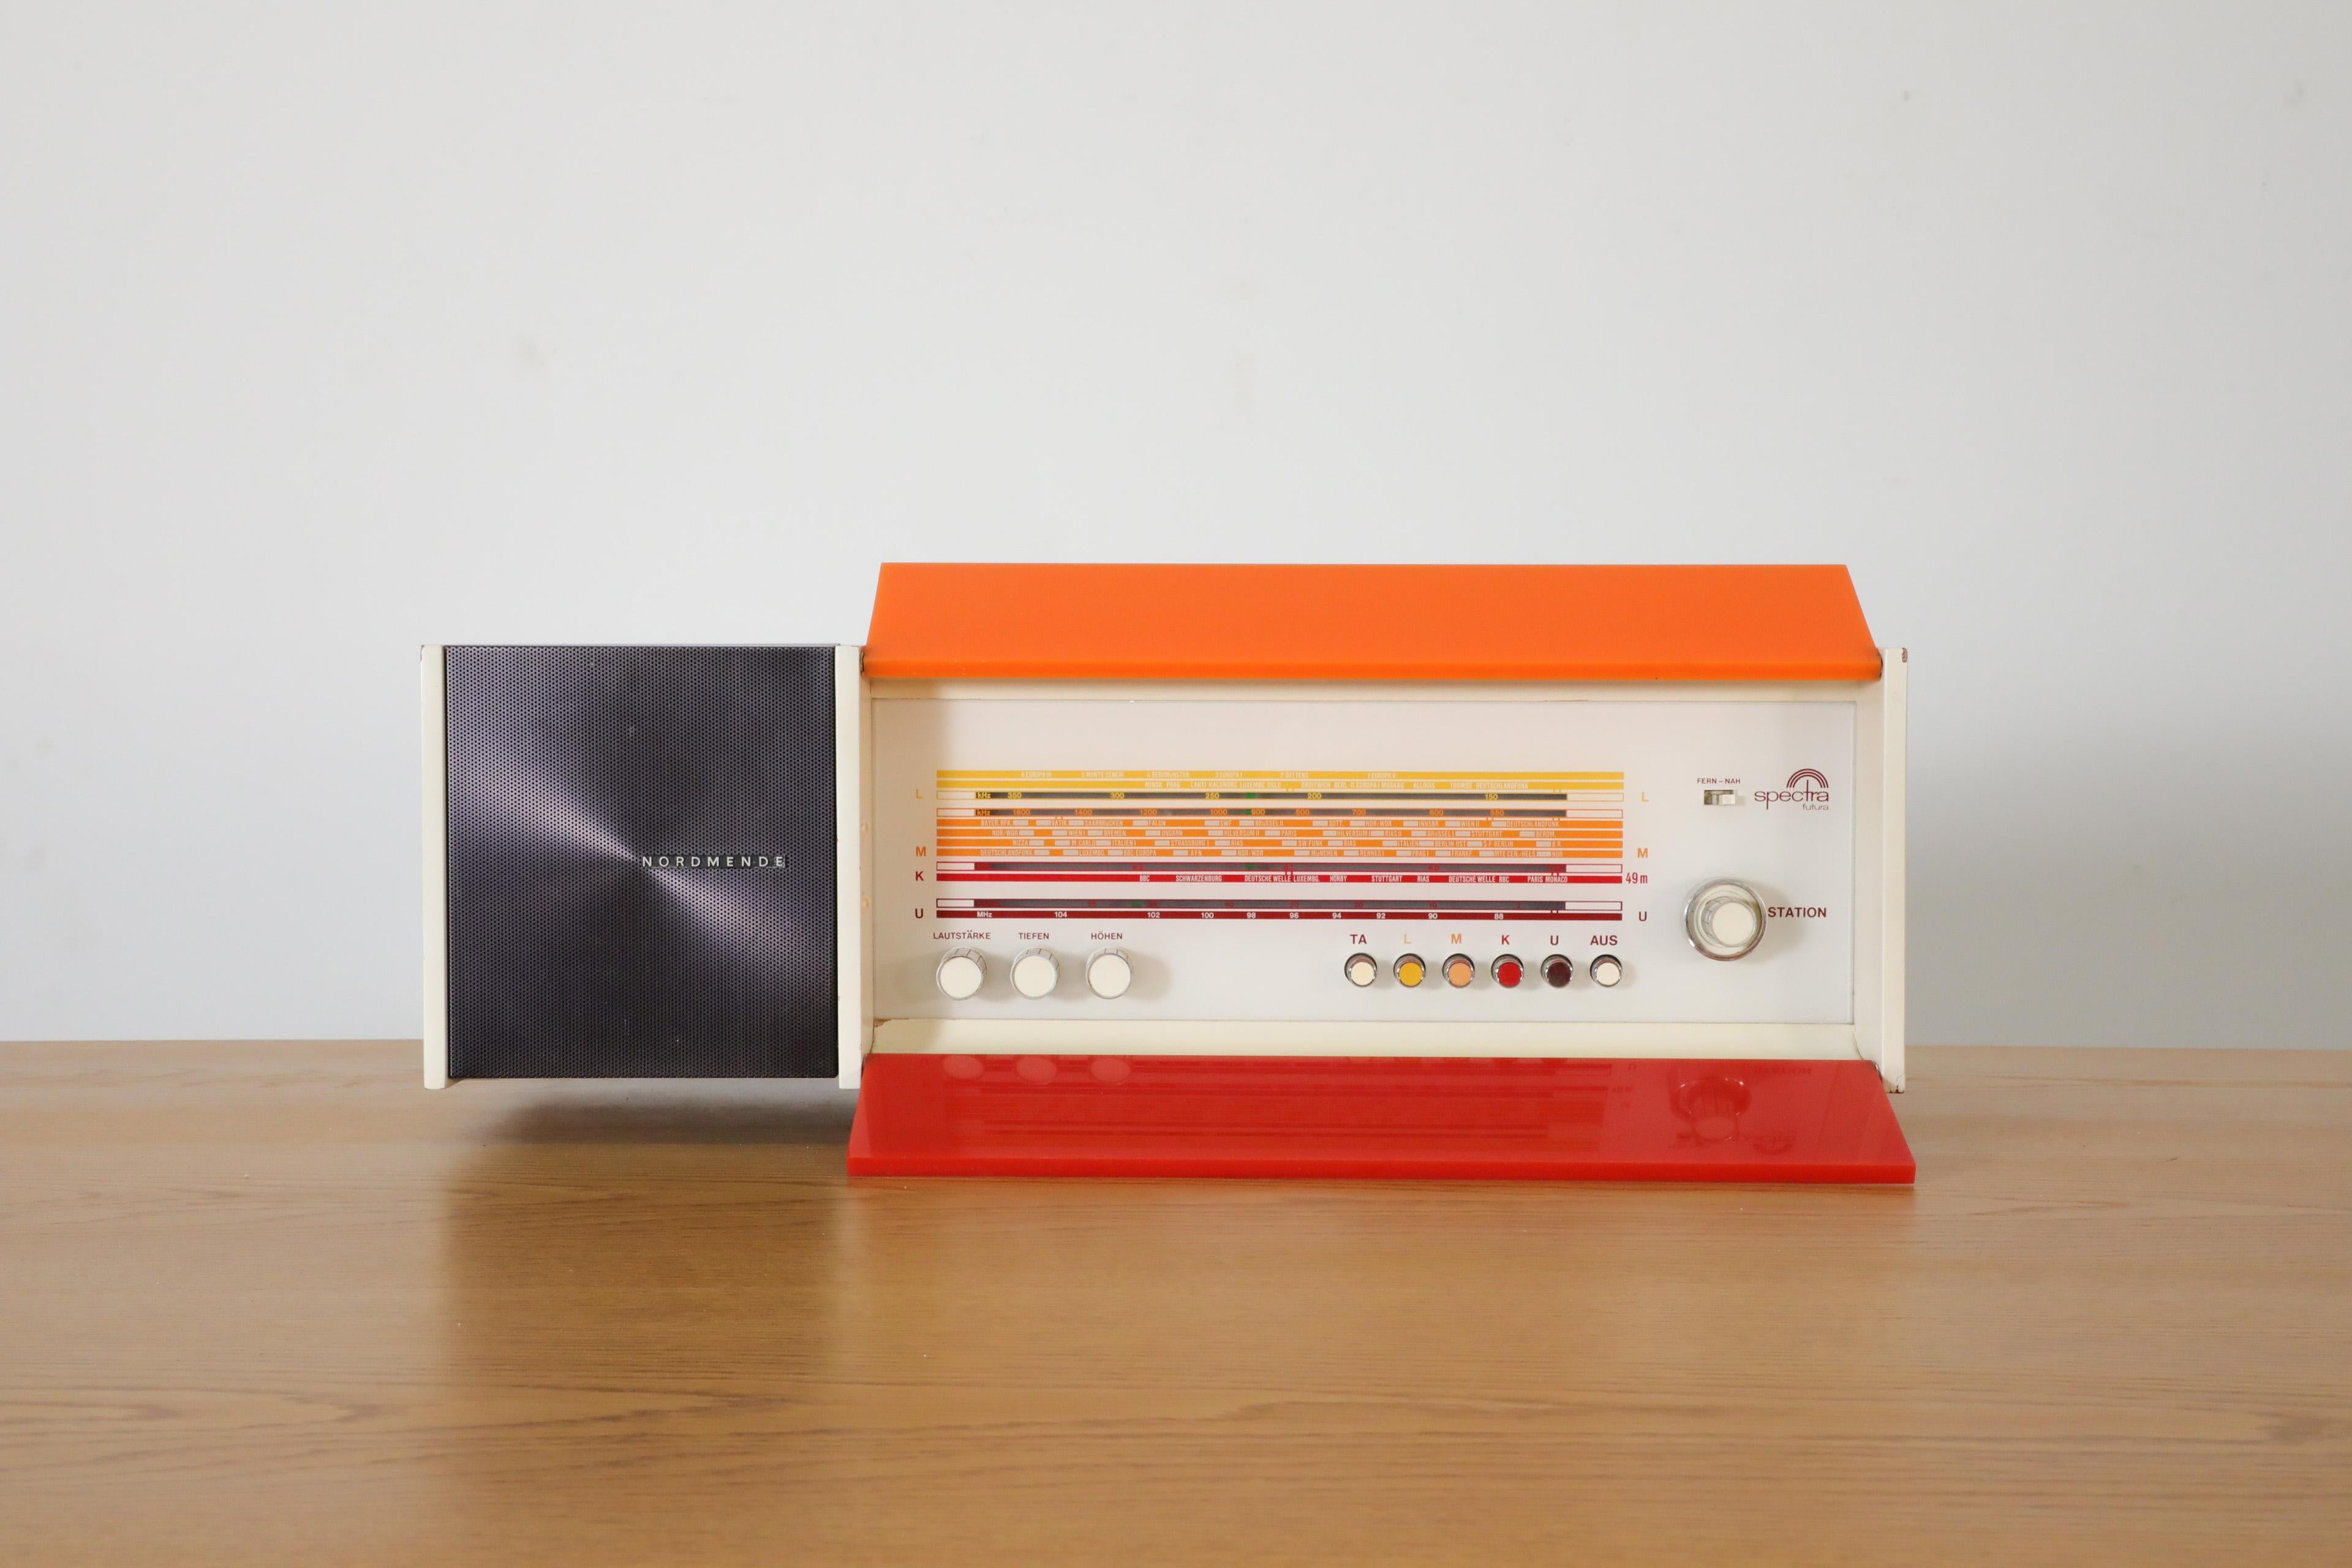 Raymond Loewy Designed Nordmende Spectra Futura Transistor Radio in Red & Orange In Good Condition For Sale In Los Angeles, CA